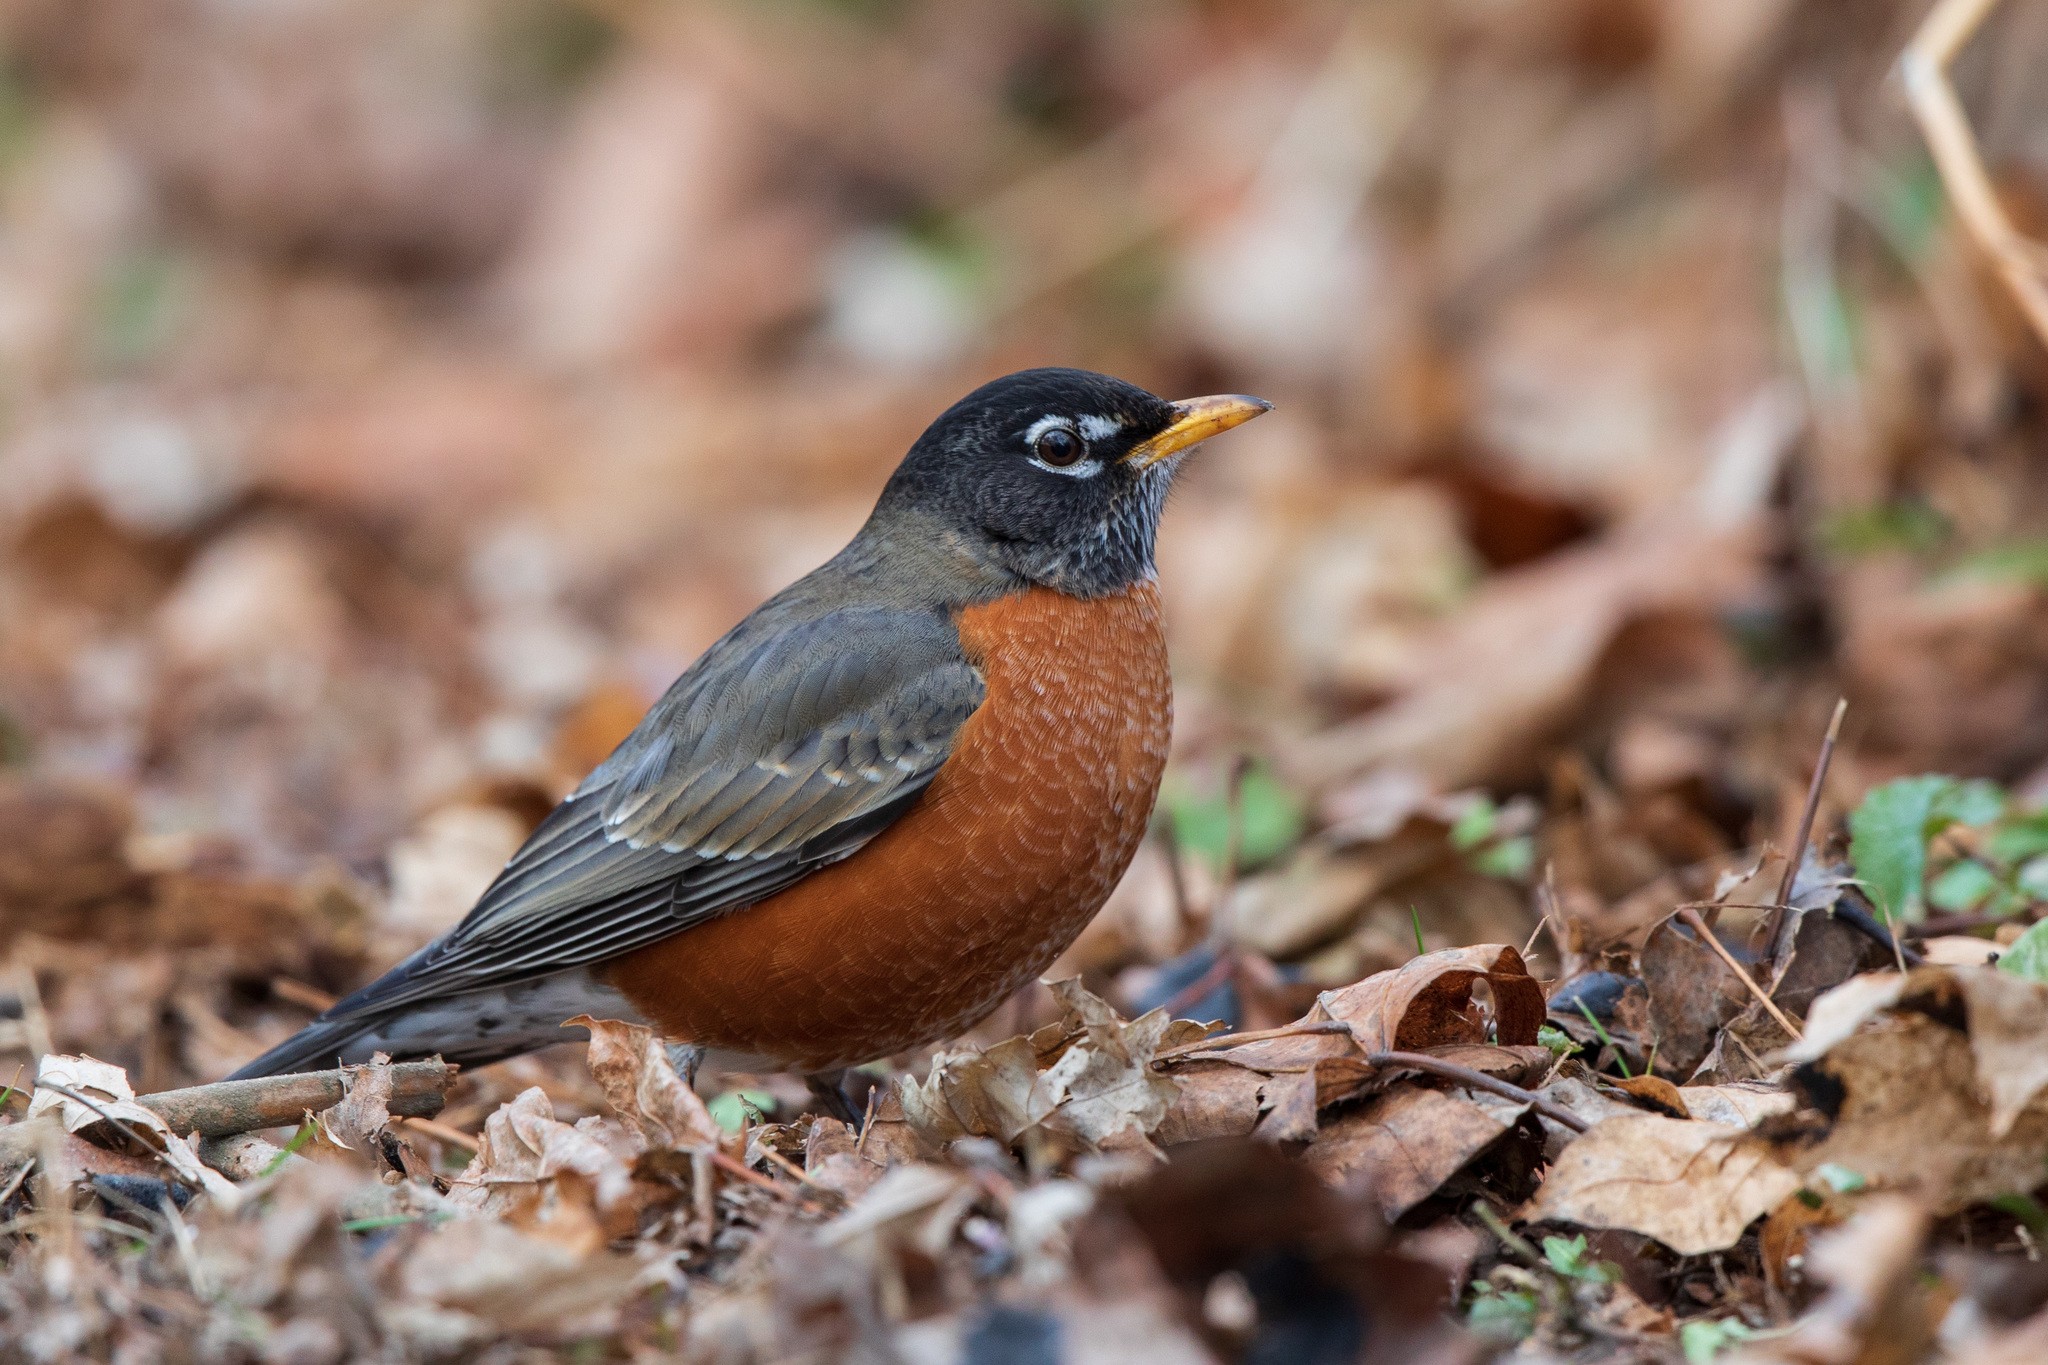 American robin on the ground, in leaf litter. Observed in January.